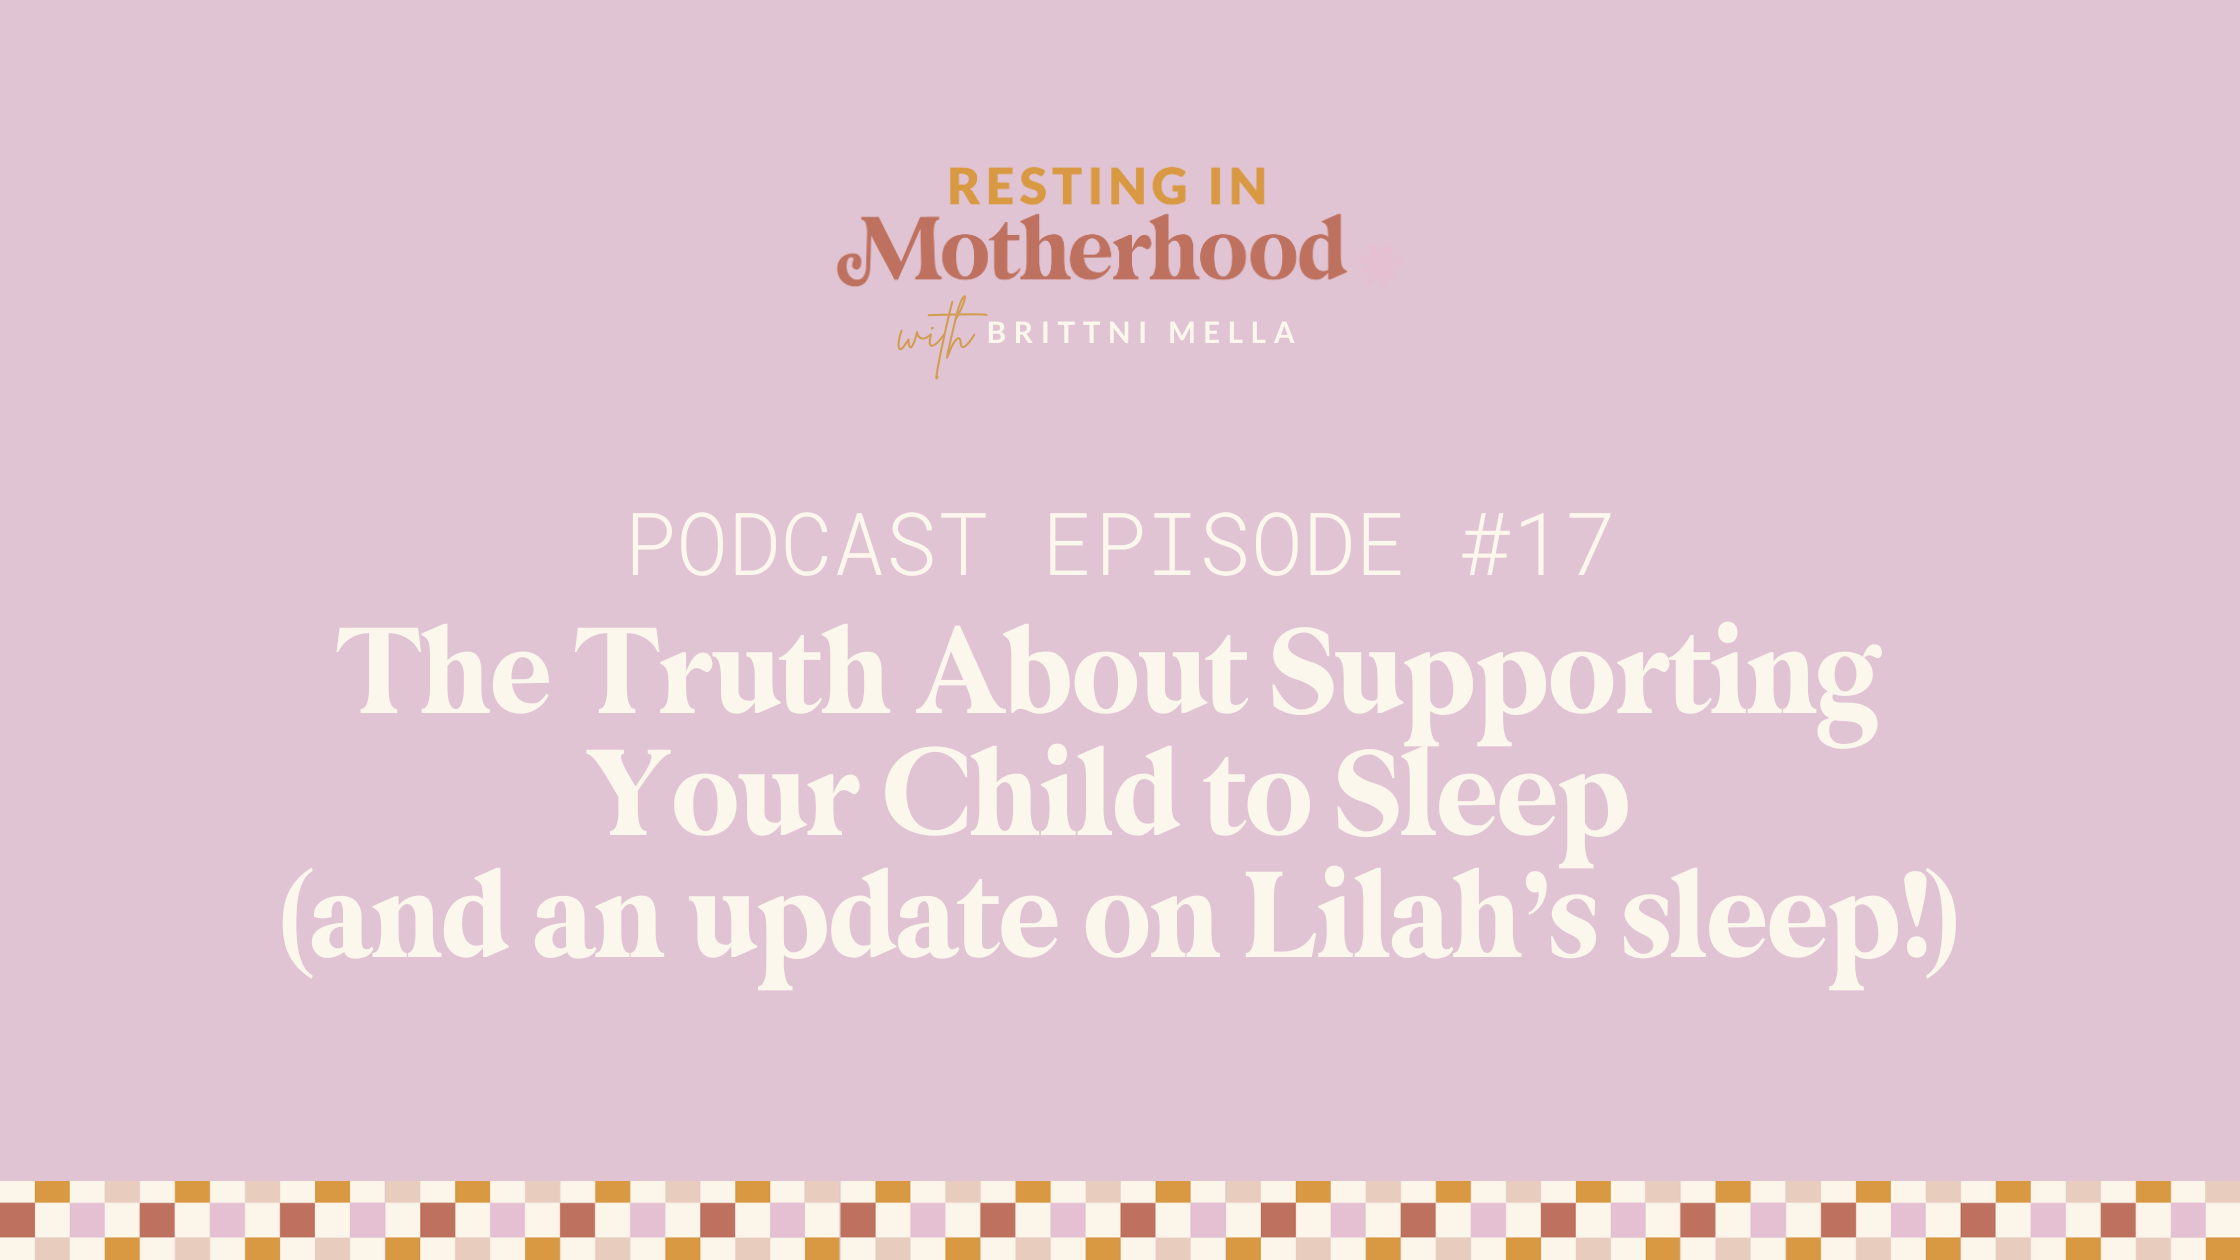 The Truth About Supporting Your Child to Sleep (and an update on Lilah’s sleep!)